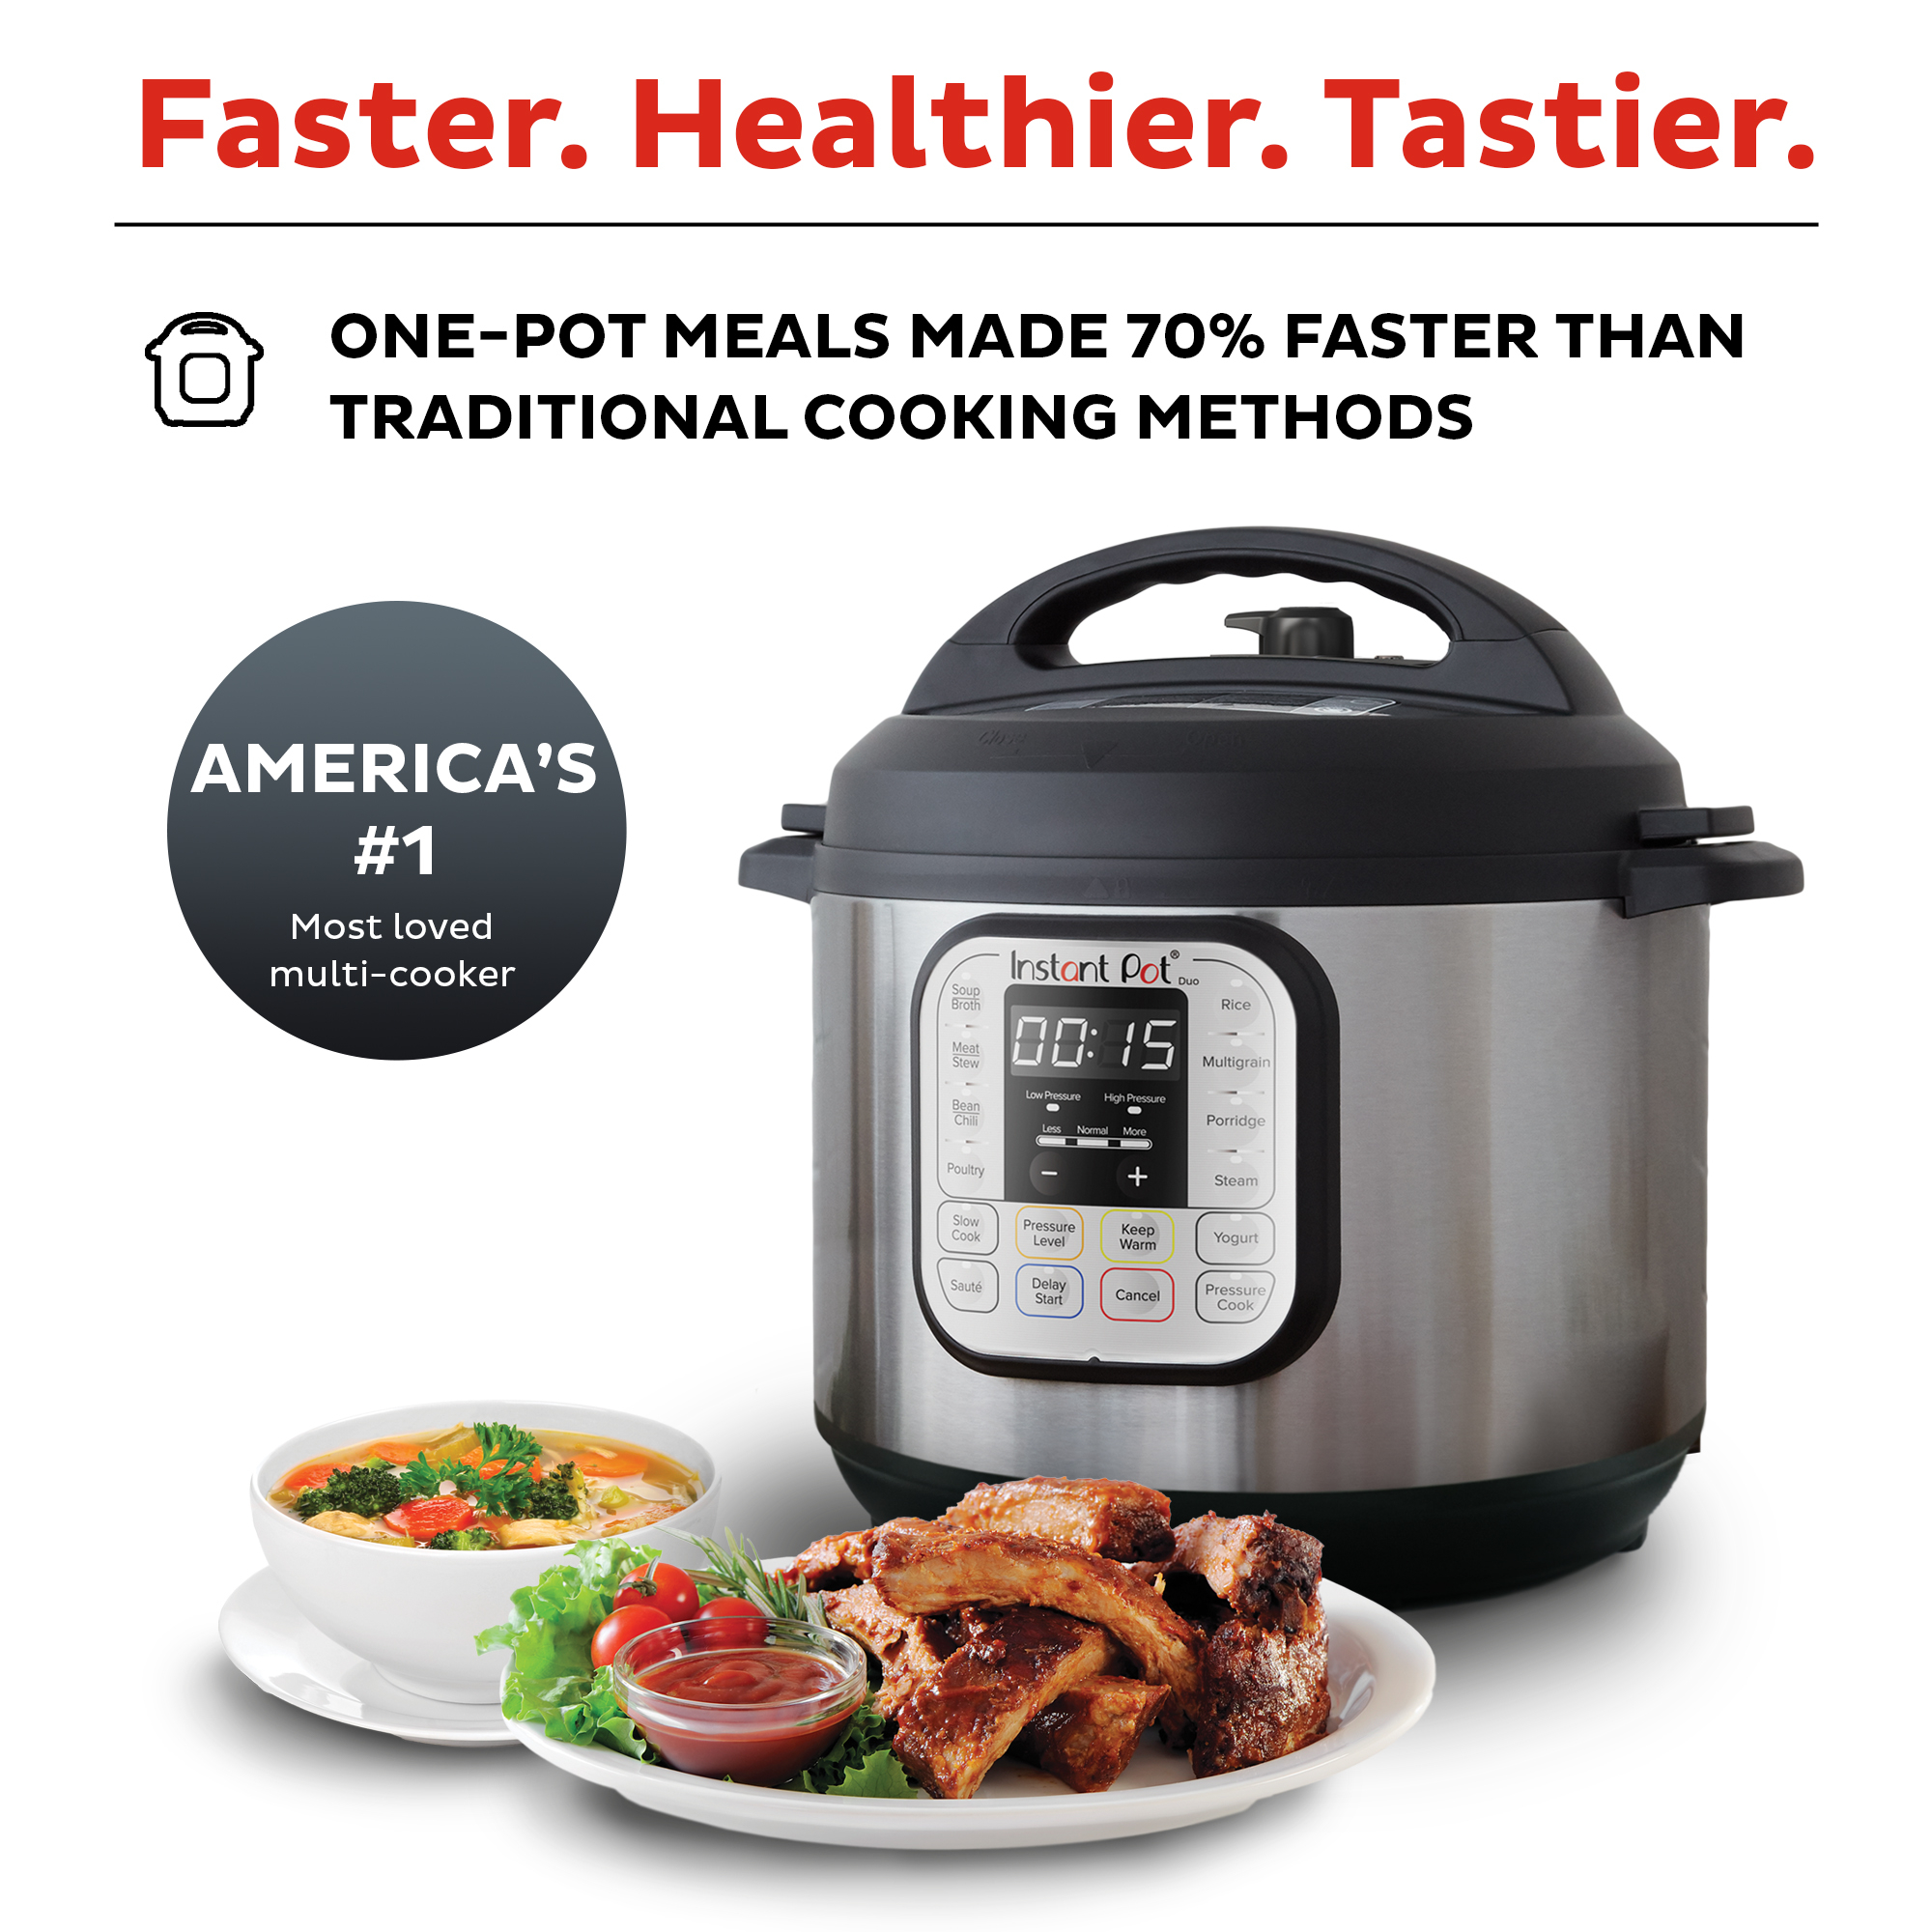 Instant Pot, 6-Quart Duo Electric Pressure Cooker, 7-in-1 Yogurt Maker, Food Steamer, Slow Cooker, Rice Cooker and More - image 4 of 10